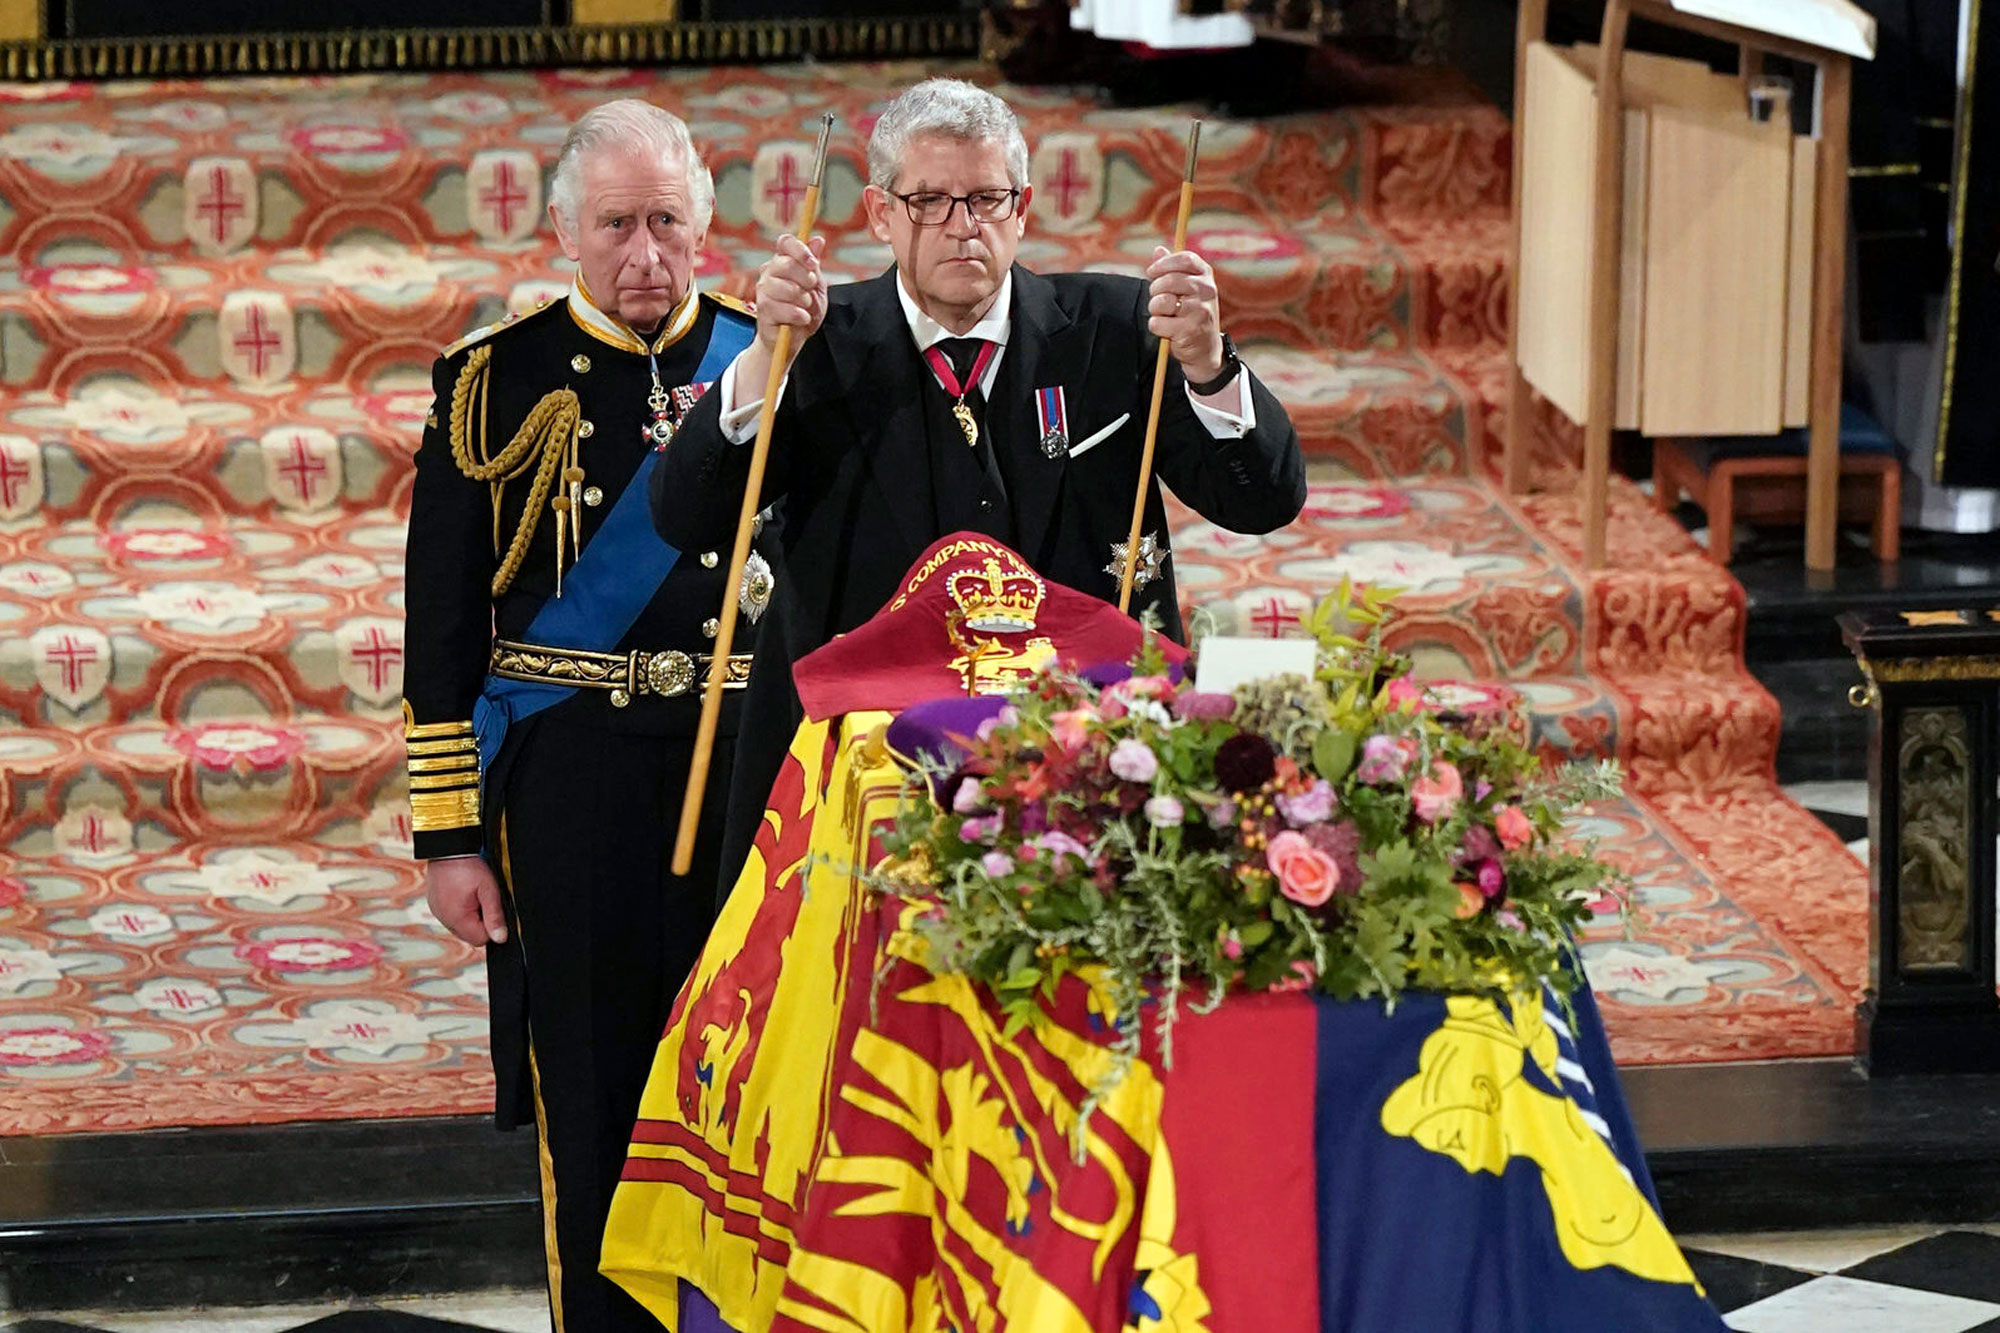 King Charles II, left, watches as The Lord Chamberlain Baron Parker breaks his Wand of Office, marking the end of his service to the sovereign, during a committal service for Britain's Queen Elizabeth II at St George's Chapel, Windsor Castle, in Windsor, England, Monday, Sept. 19, 2022. (Joe Giddens—Pool/AP)